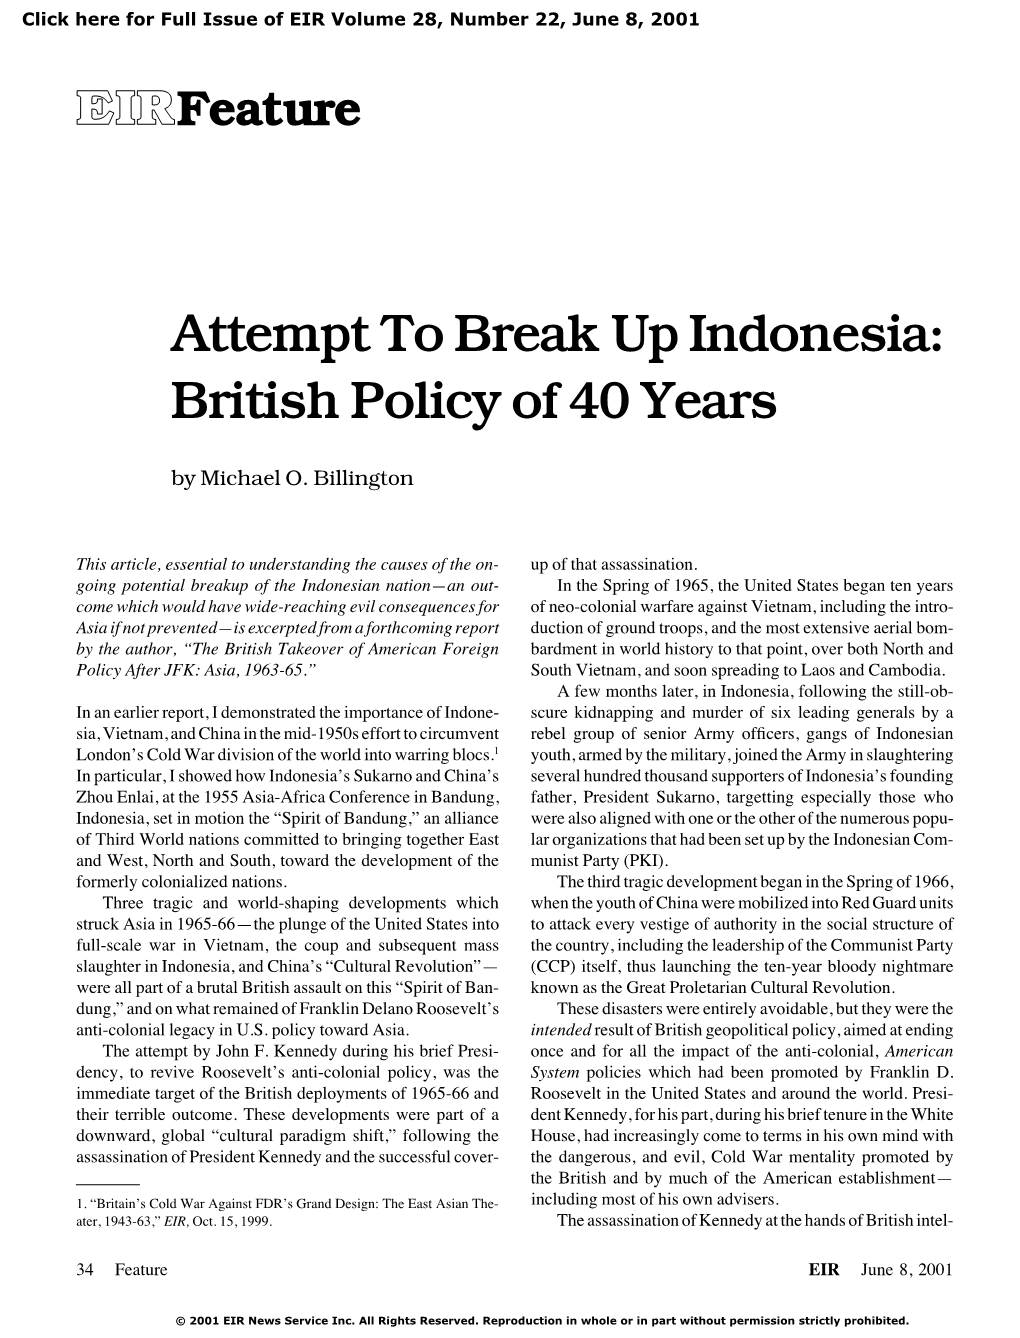 Attempt to Break up Indonesia: British Policy of 40 Years